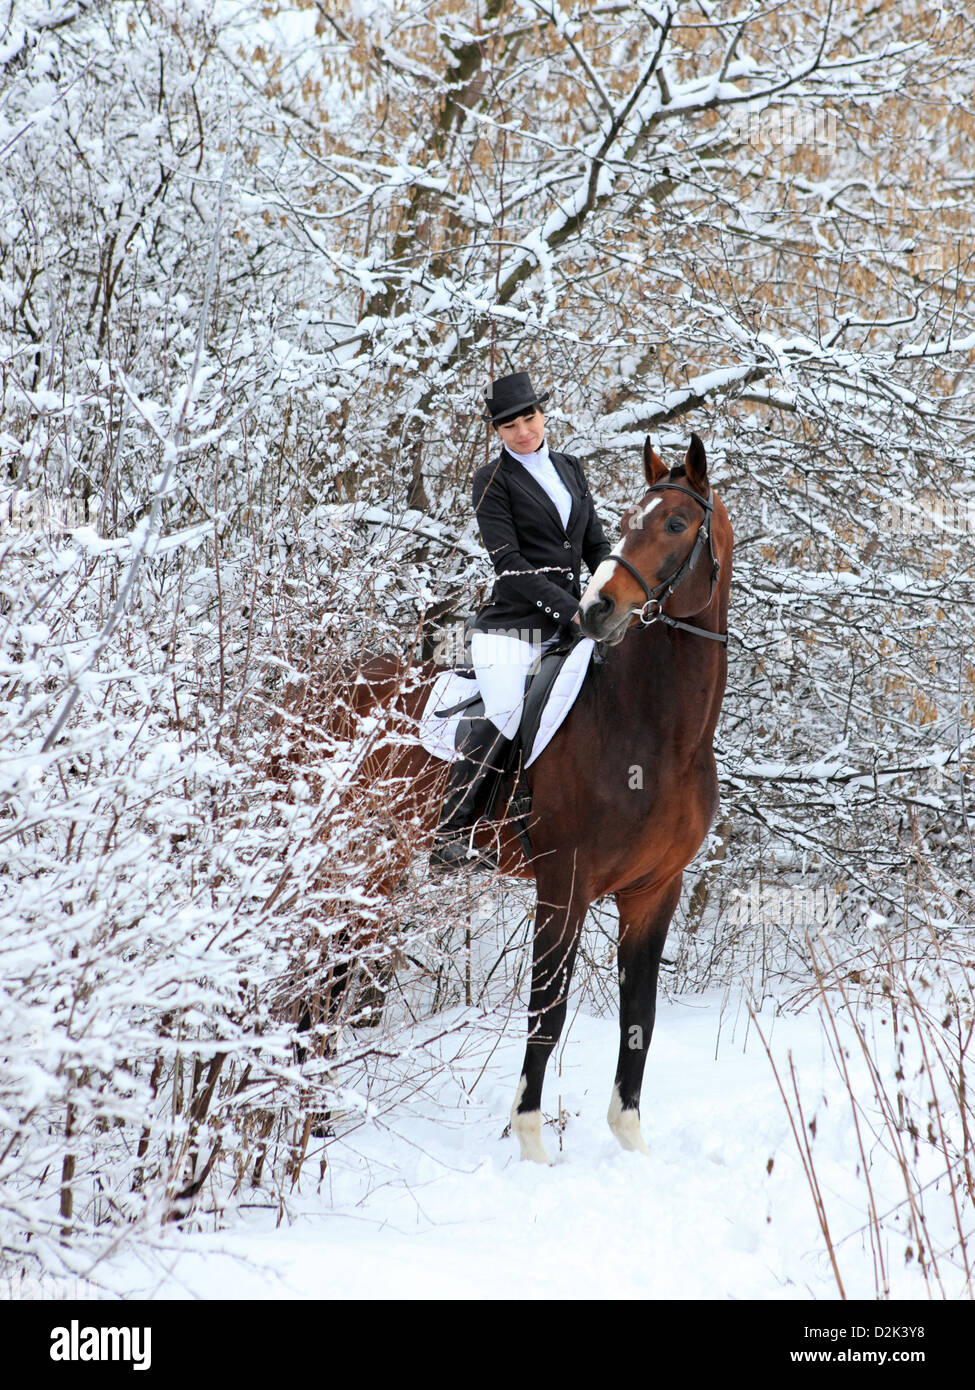 Equestrian in snow woods Stock Photo